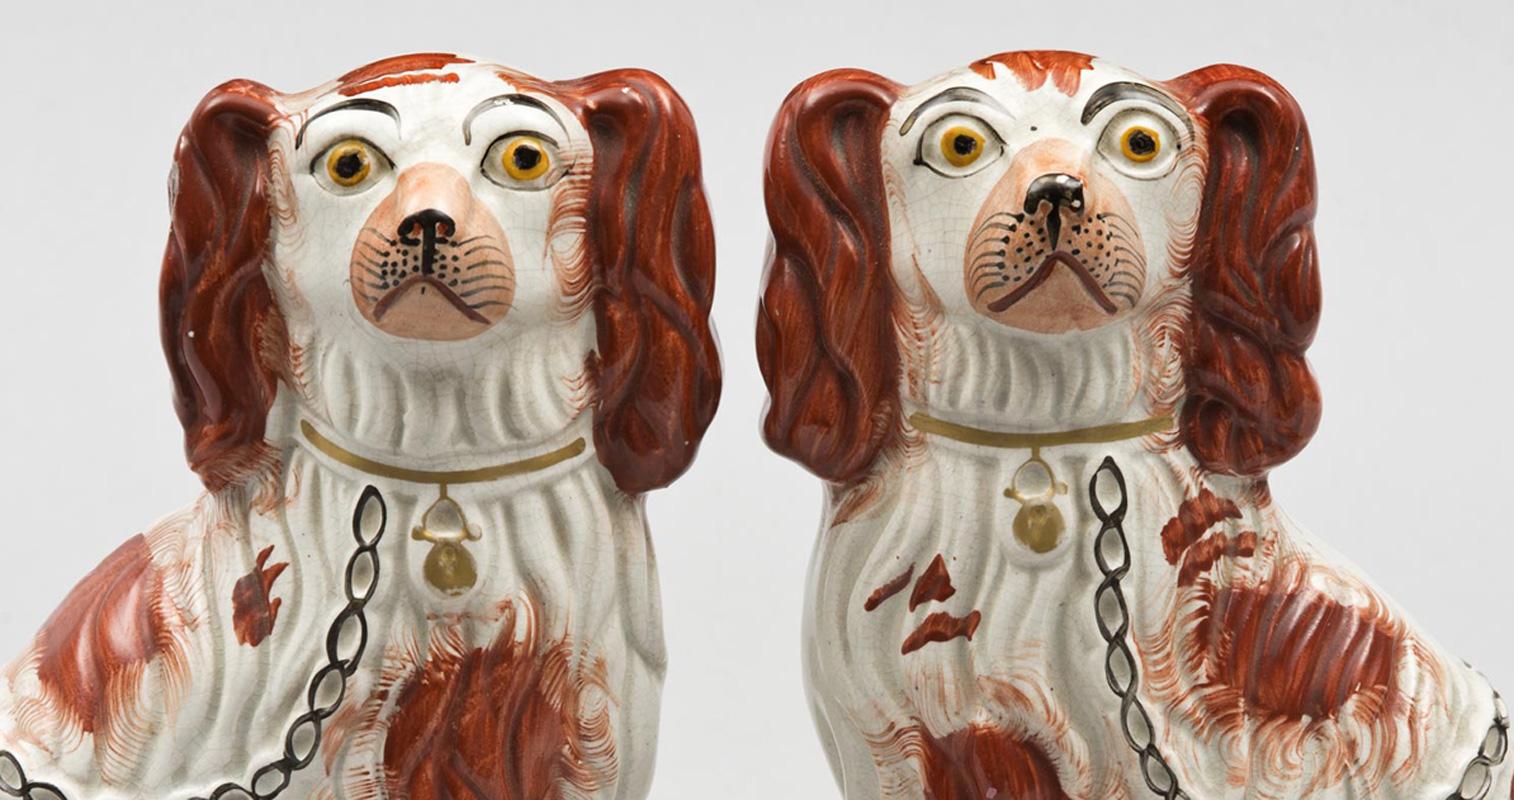 Pair of red Staffordshire dogs with pink noses, gilded collar and locket, black chain, the number “3” on bottom denoting the model size. These dogs usually came in six sizes.